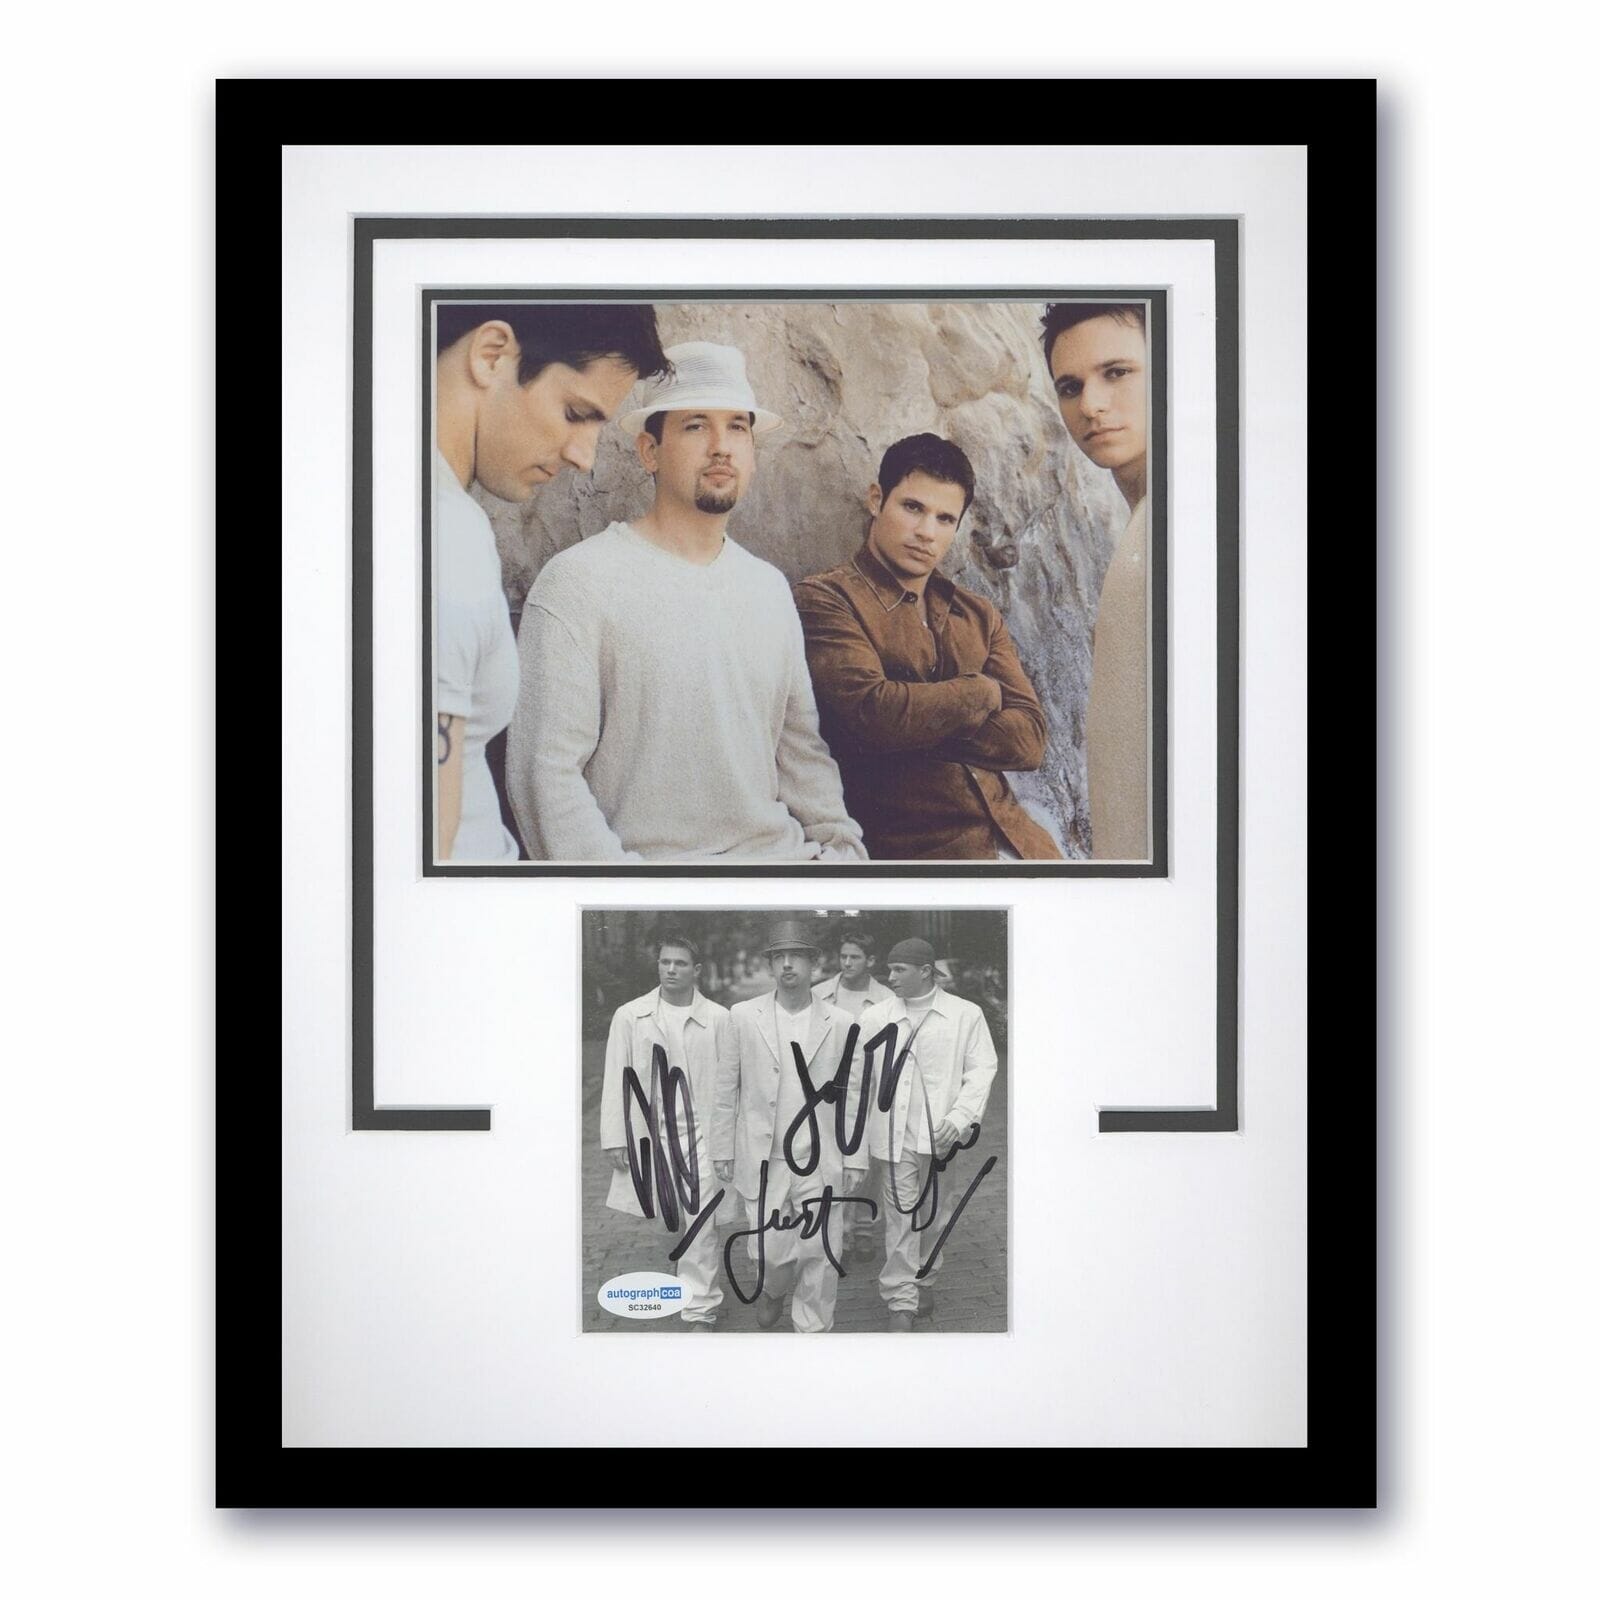 98 Degrees 98 Degrees and Rising AUTOGRAPH Signed Framed 11x14 Display  ACOA Opens in a new window or tab